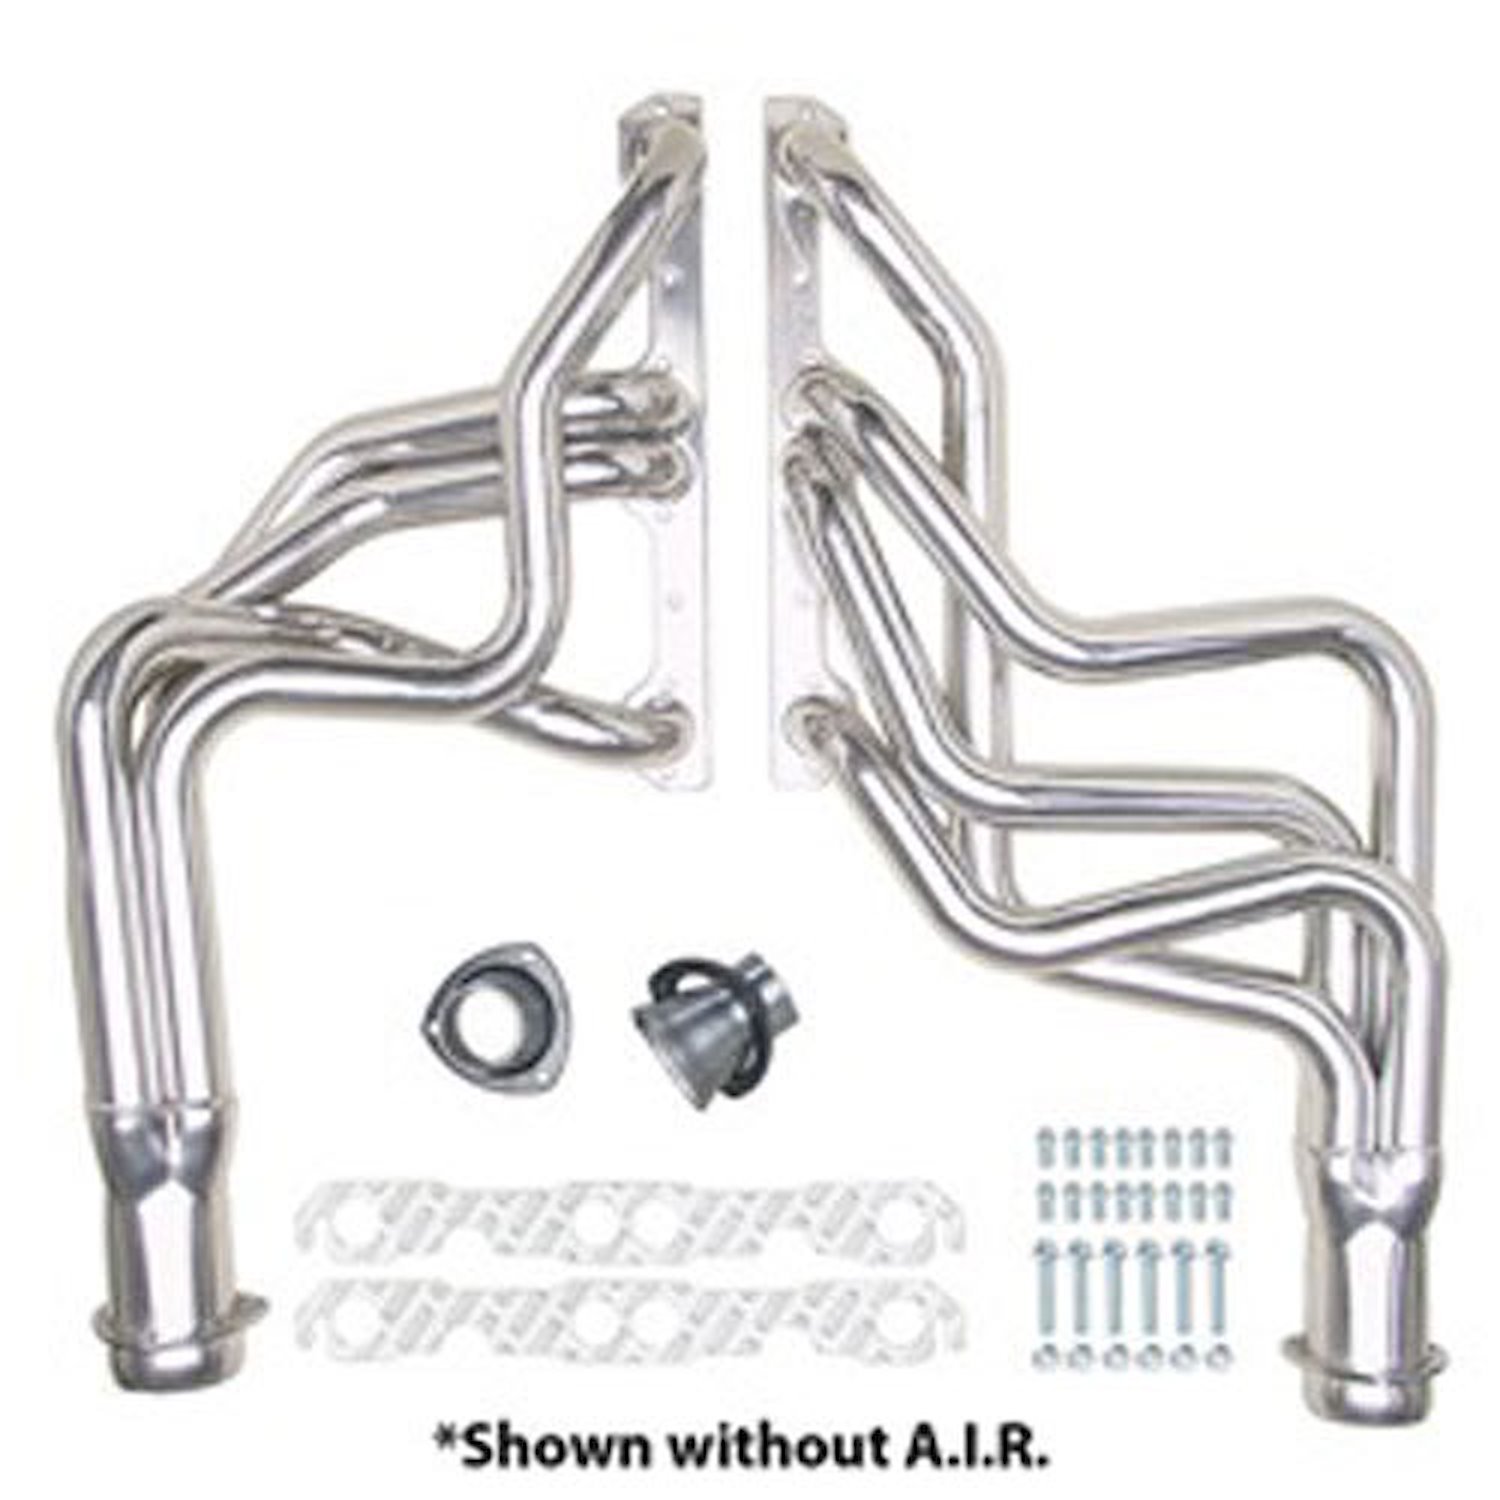 Standard Duty HTC Coated Full-Length Headers 1964-94 Chevy